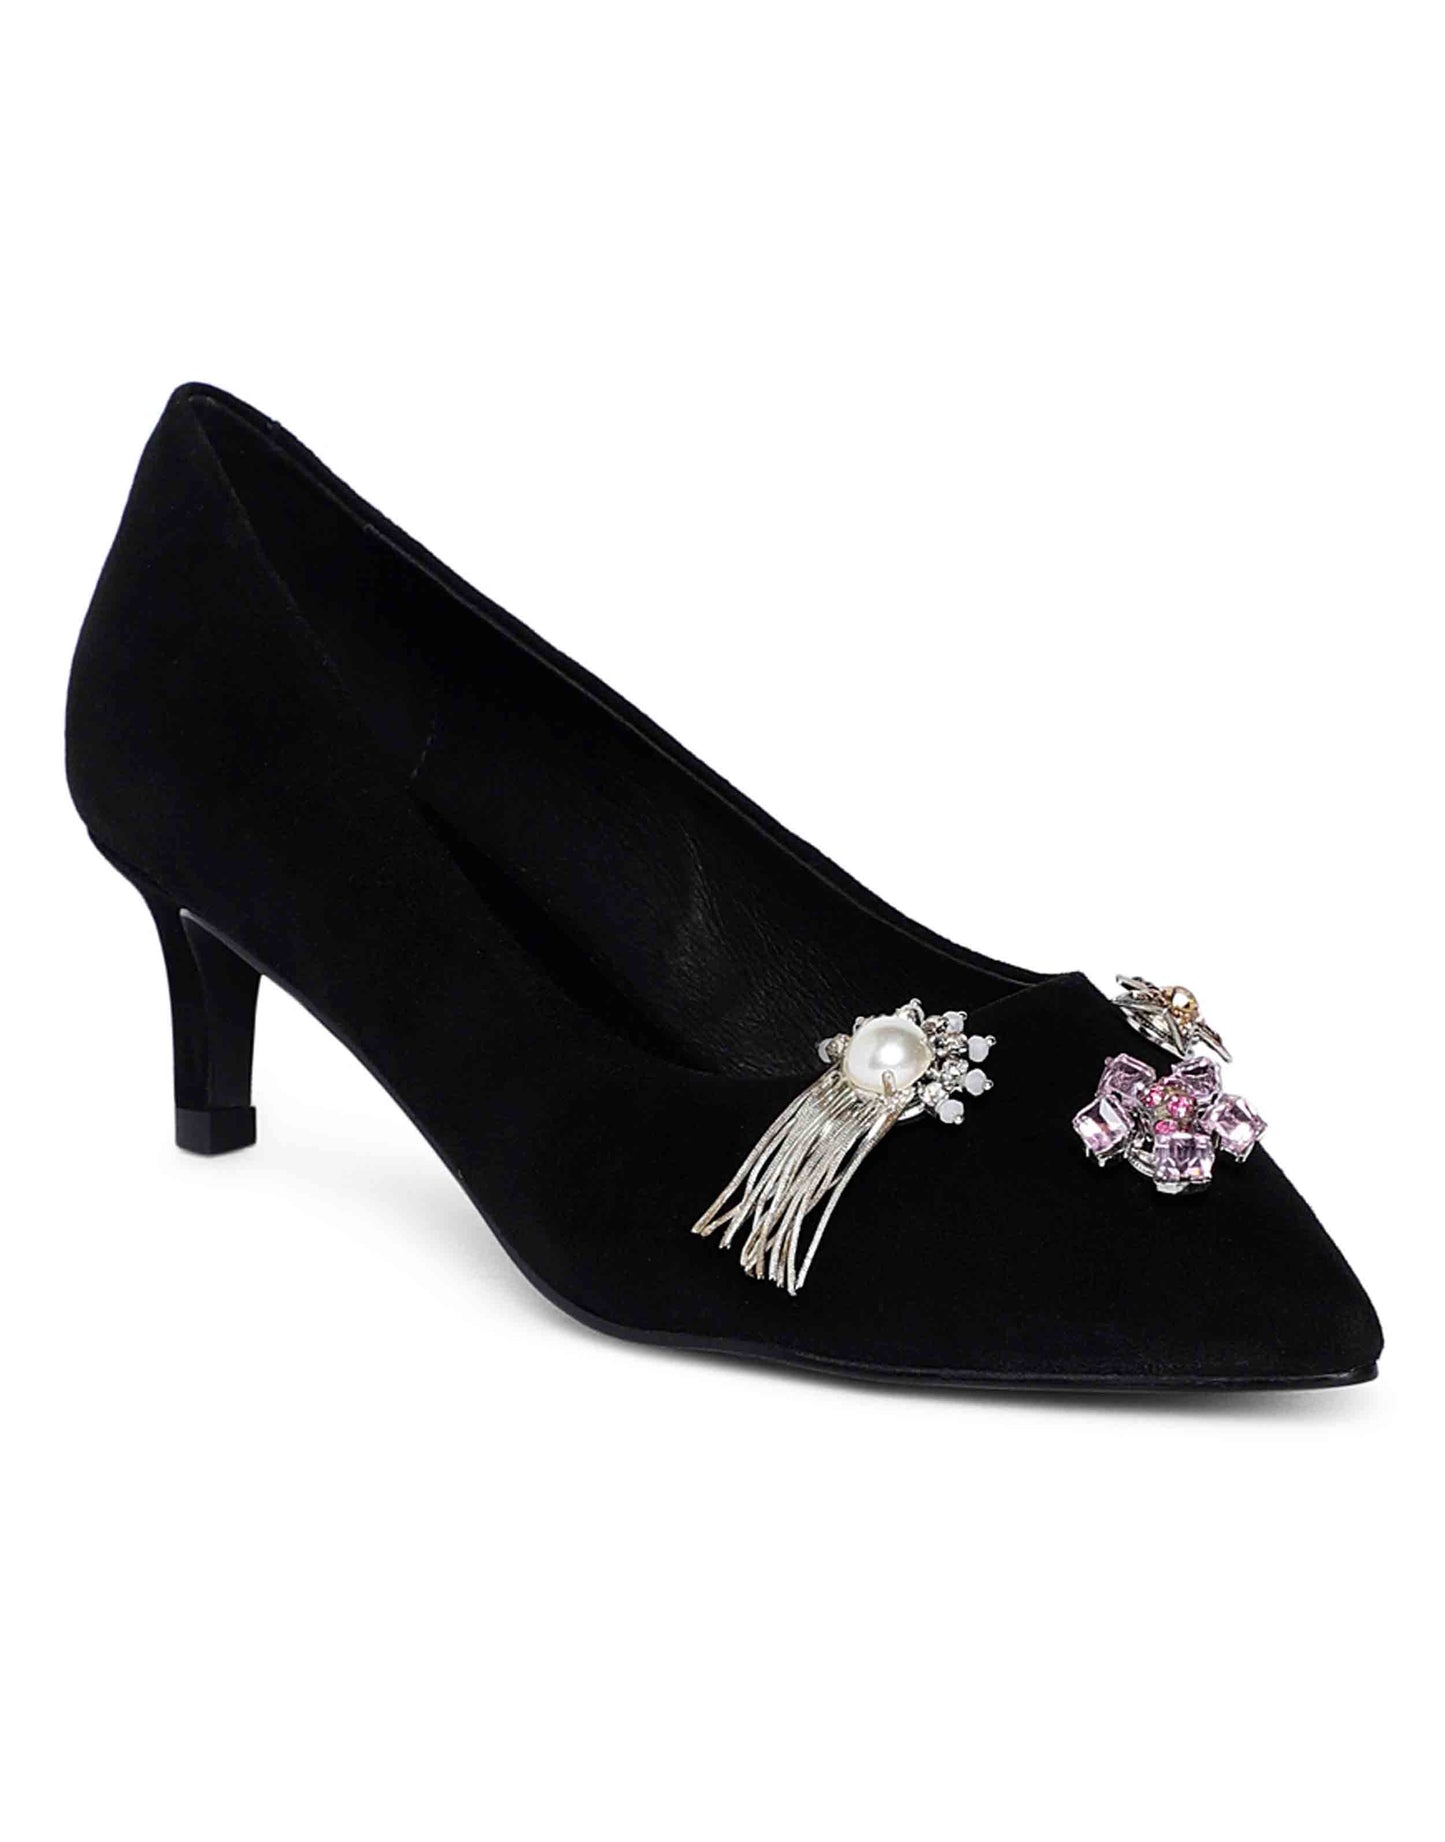 Inter-changeable Studded Pumps